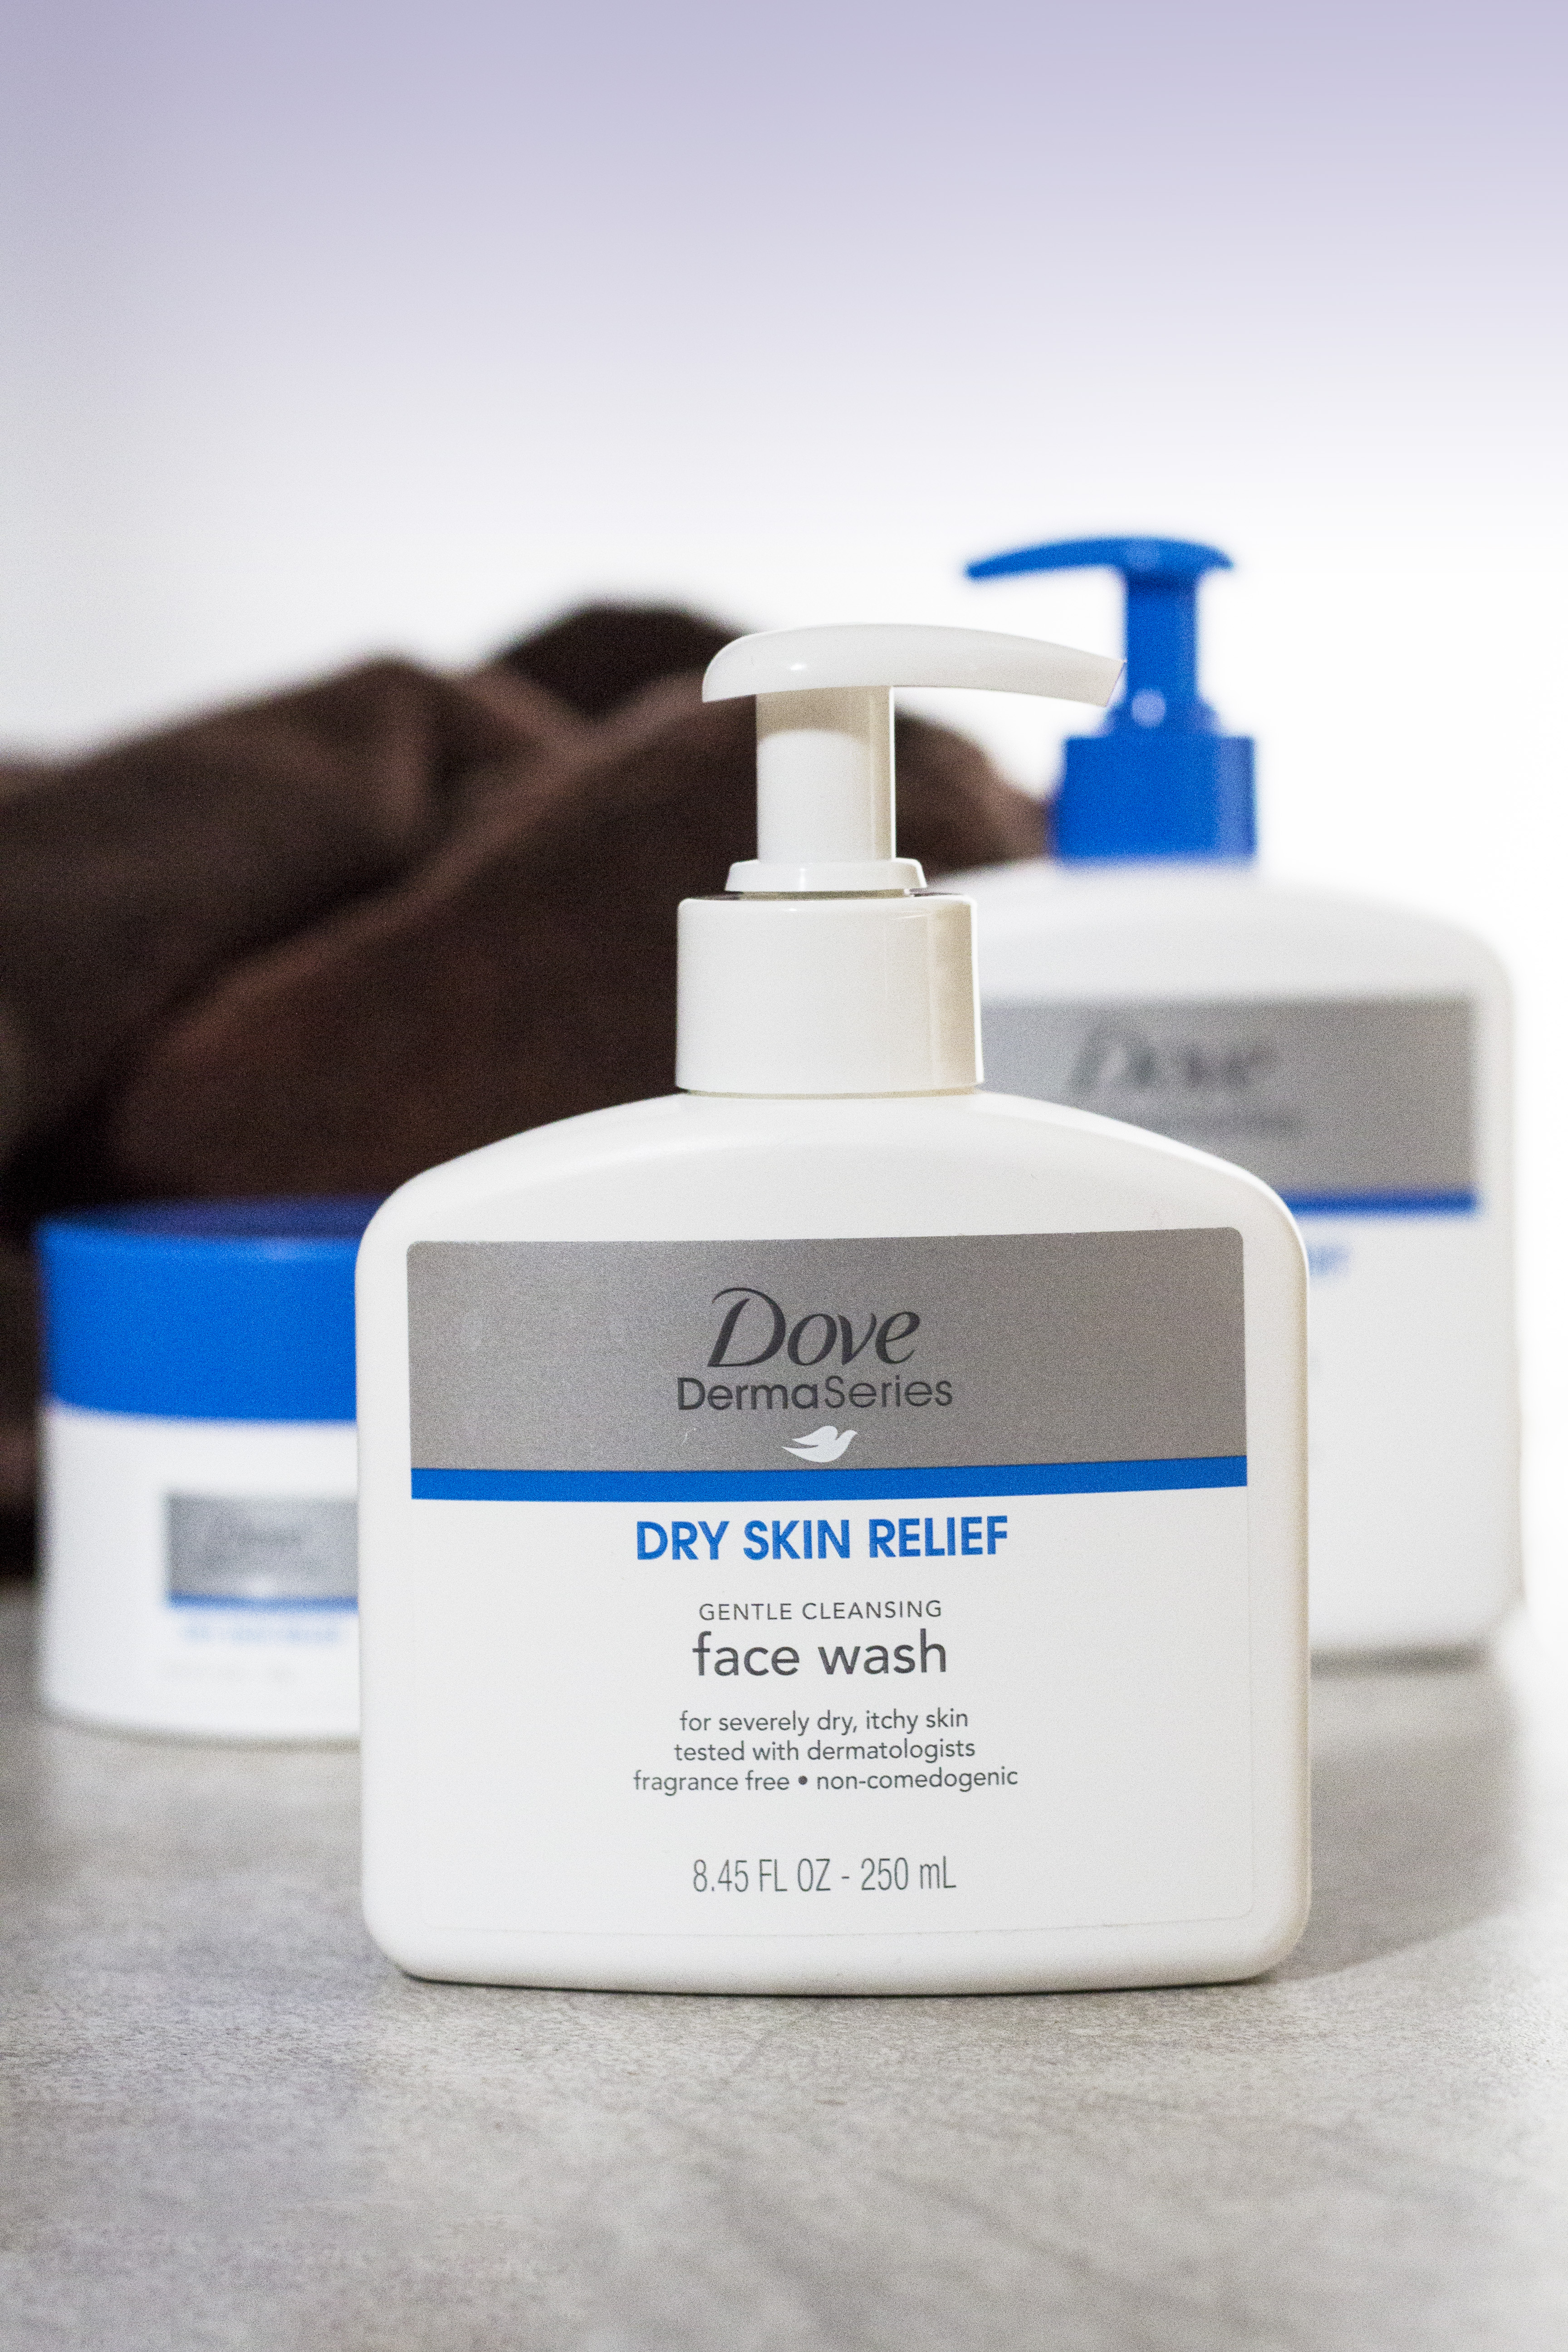 Dove just introduced their new DermaSeries, and after testing the gentle cleansing face wash [c/o], replenishing body lotion [c/o], and expert repairing balm [c/o], I'm happy to report that this line is a godsend for the sensitivities that come with winter skin.